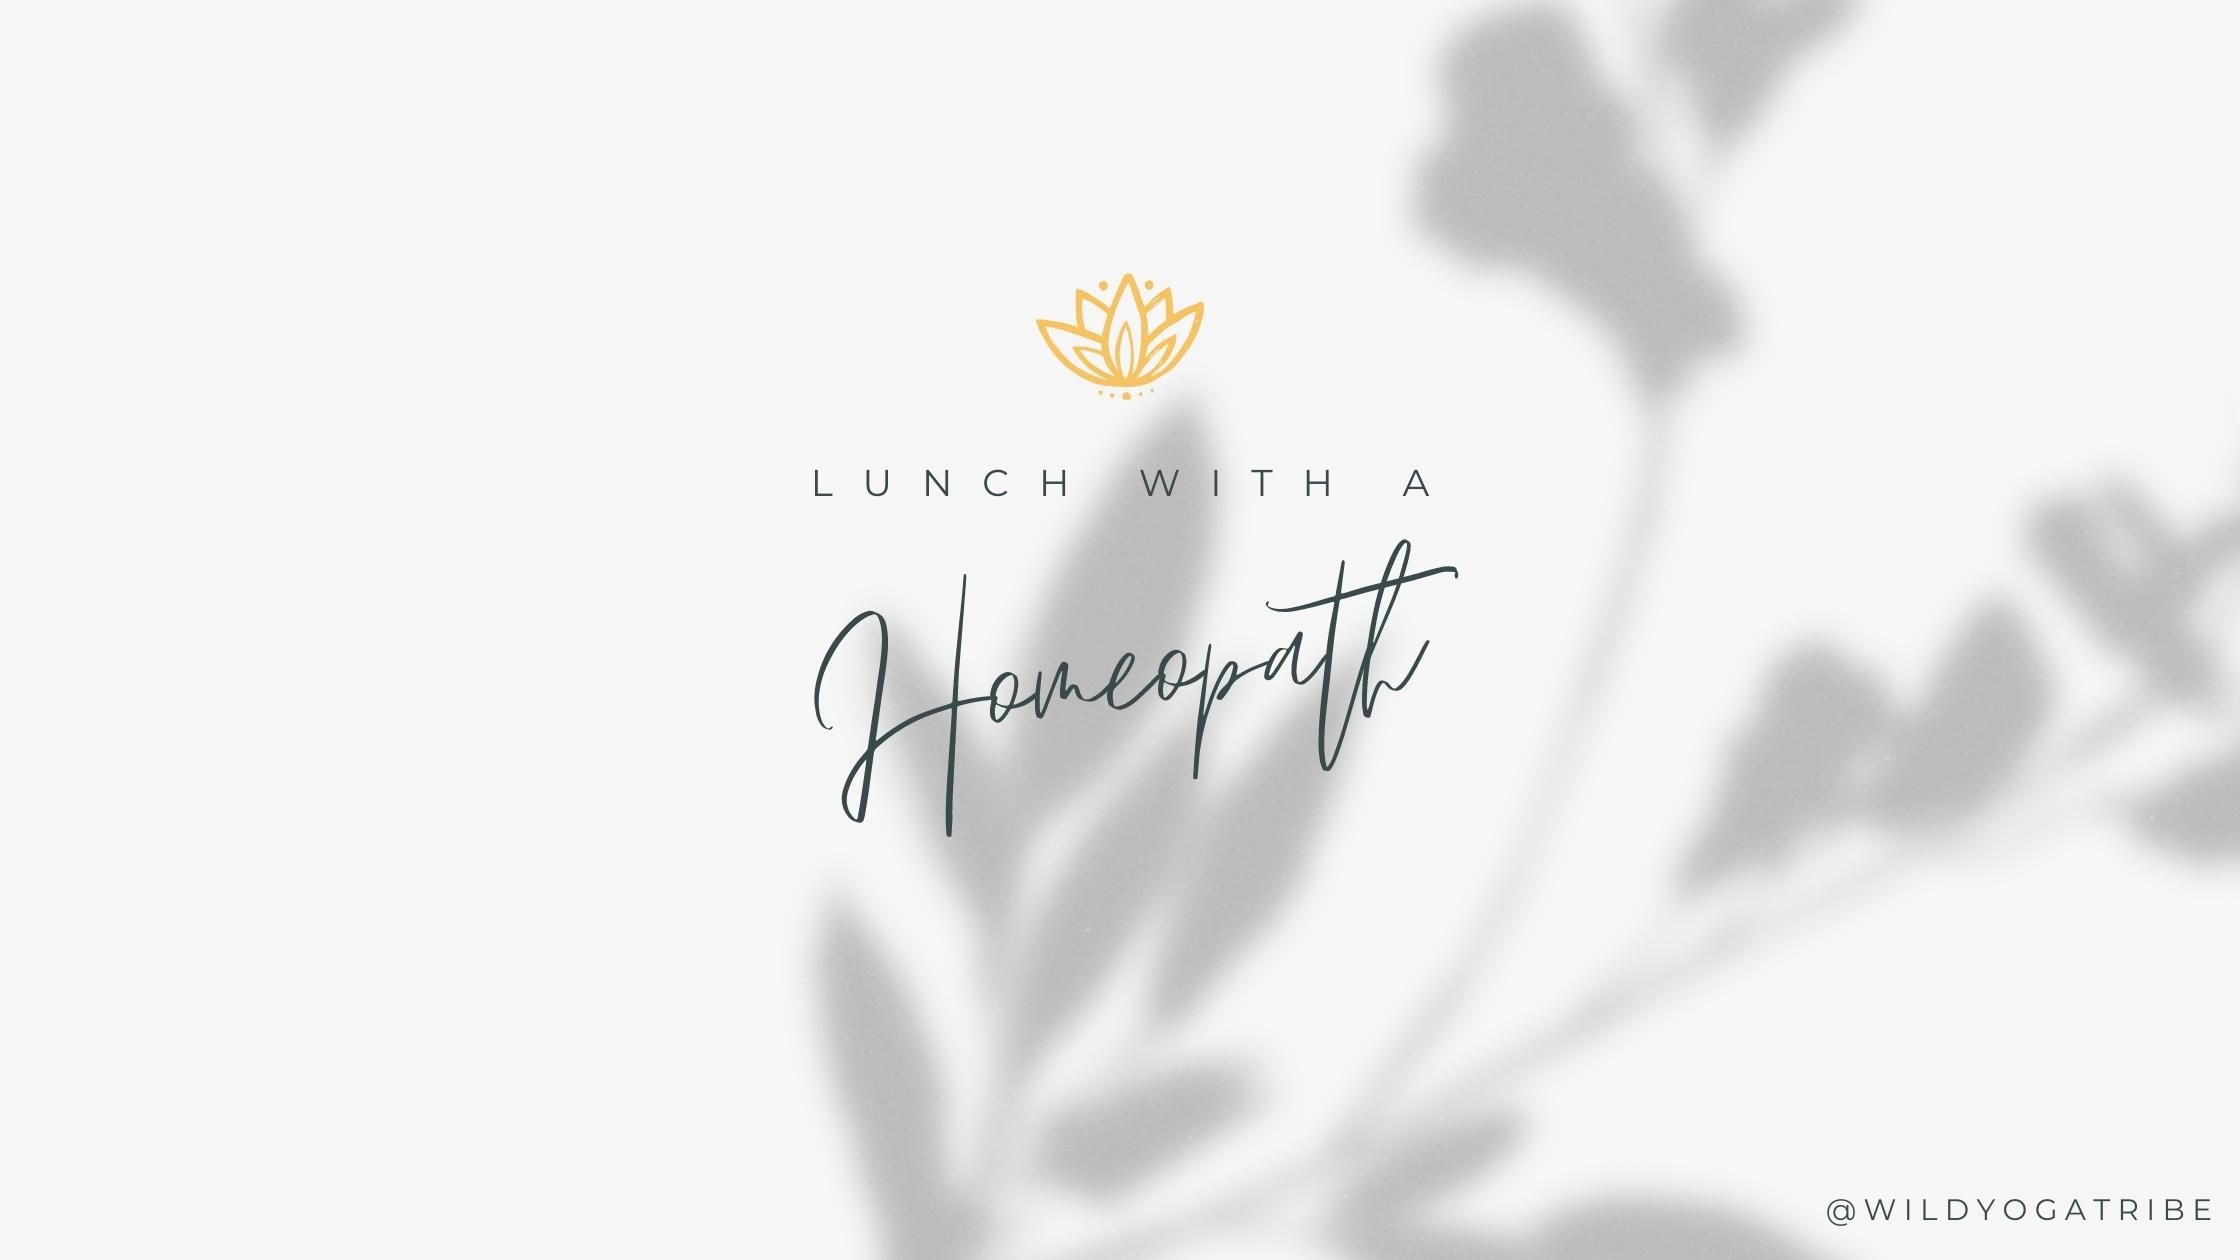 Lunch with a Homeopath